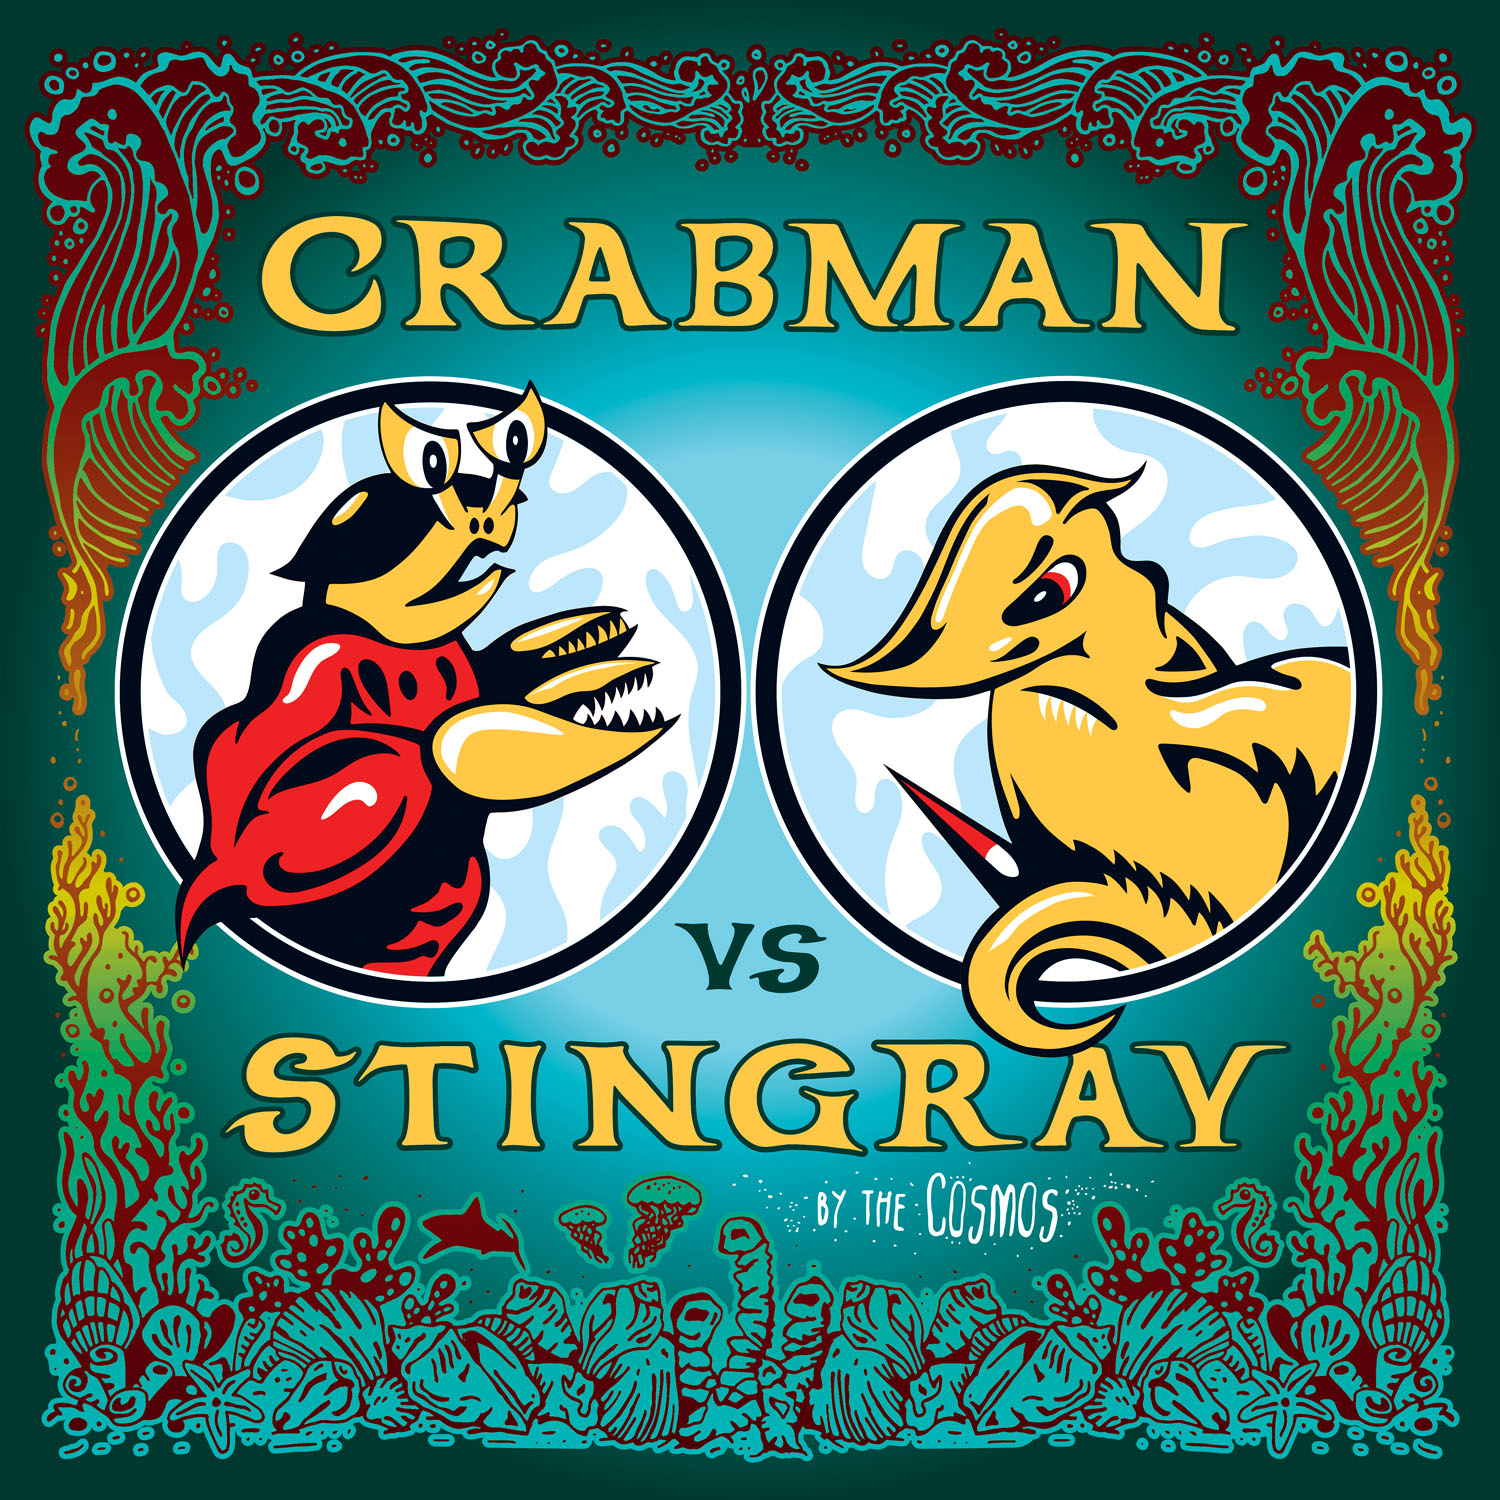 Twin Cities Graphic Design - Album art for "Crabman vs Stingray" by the Cosmos